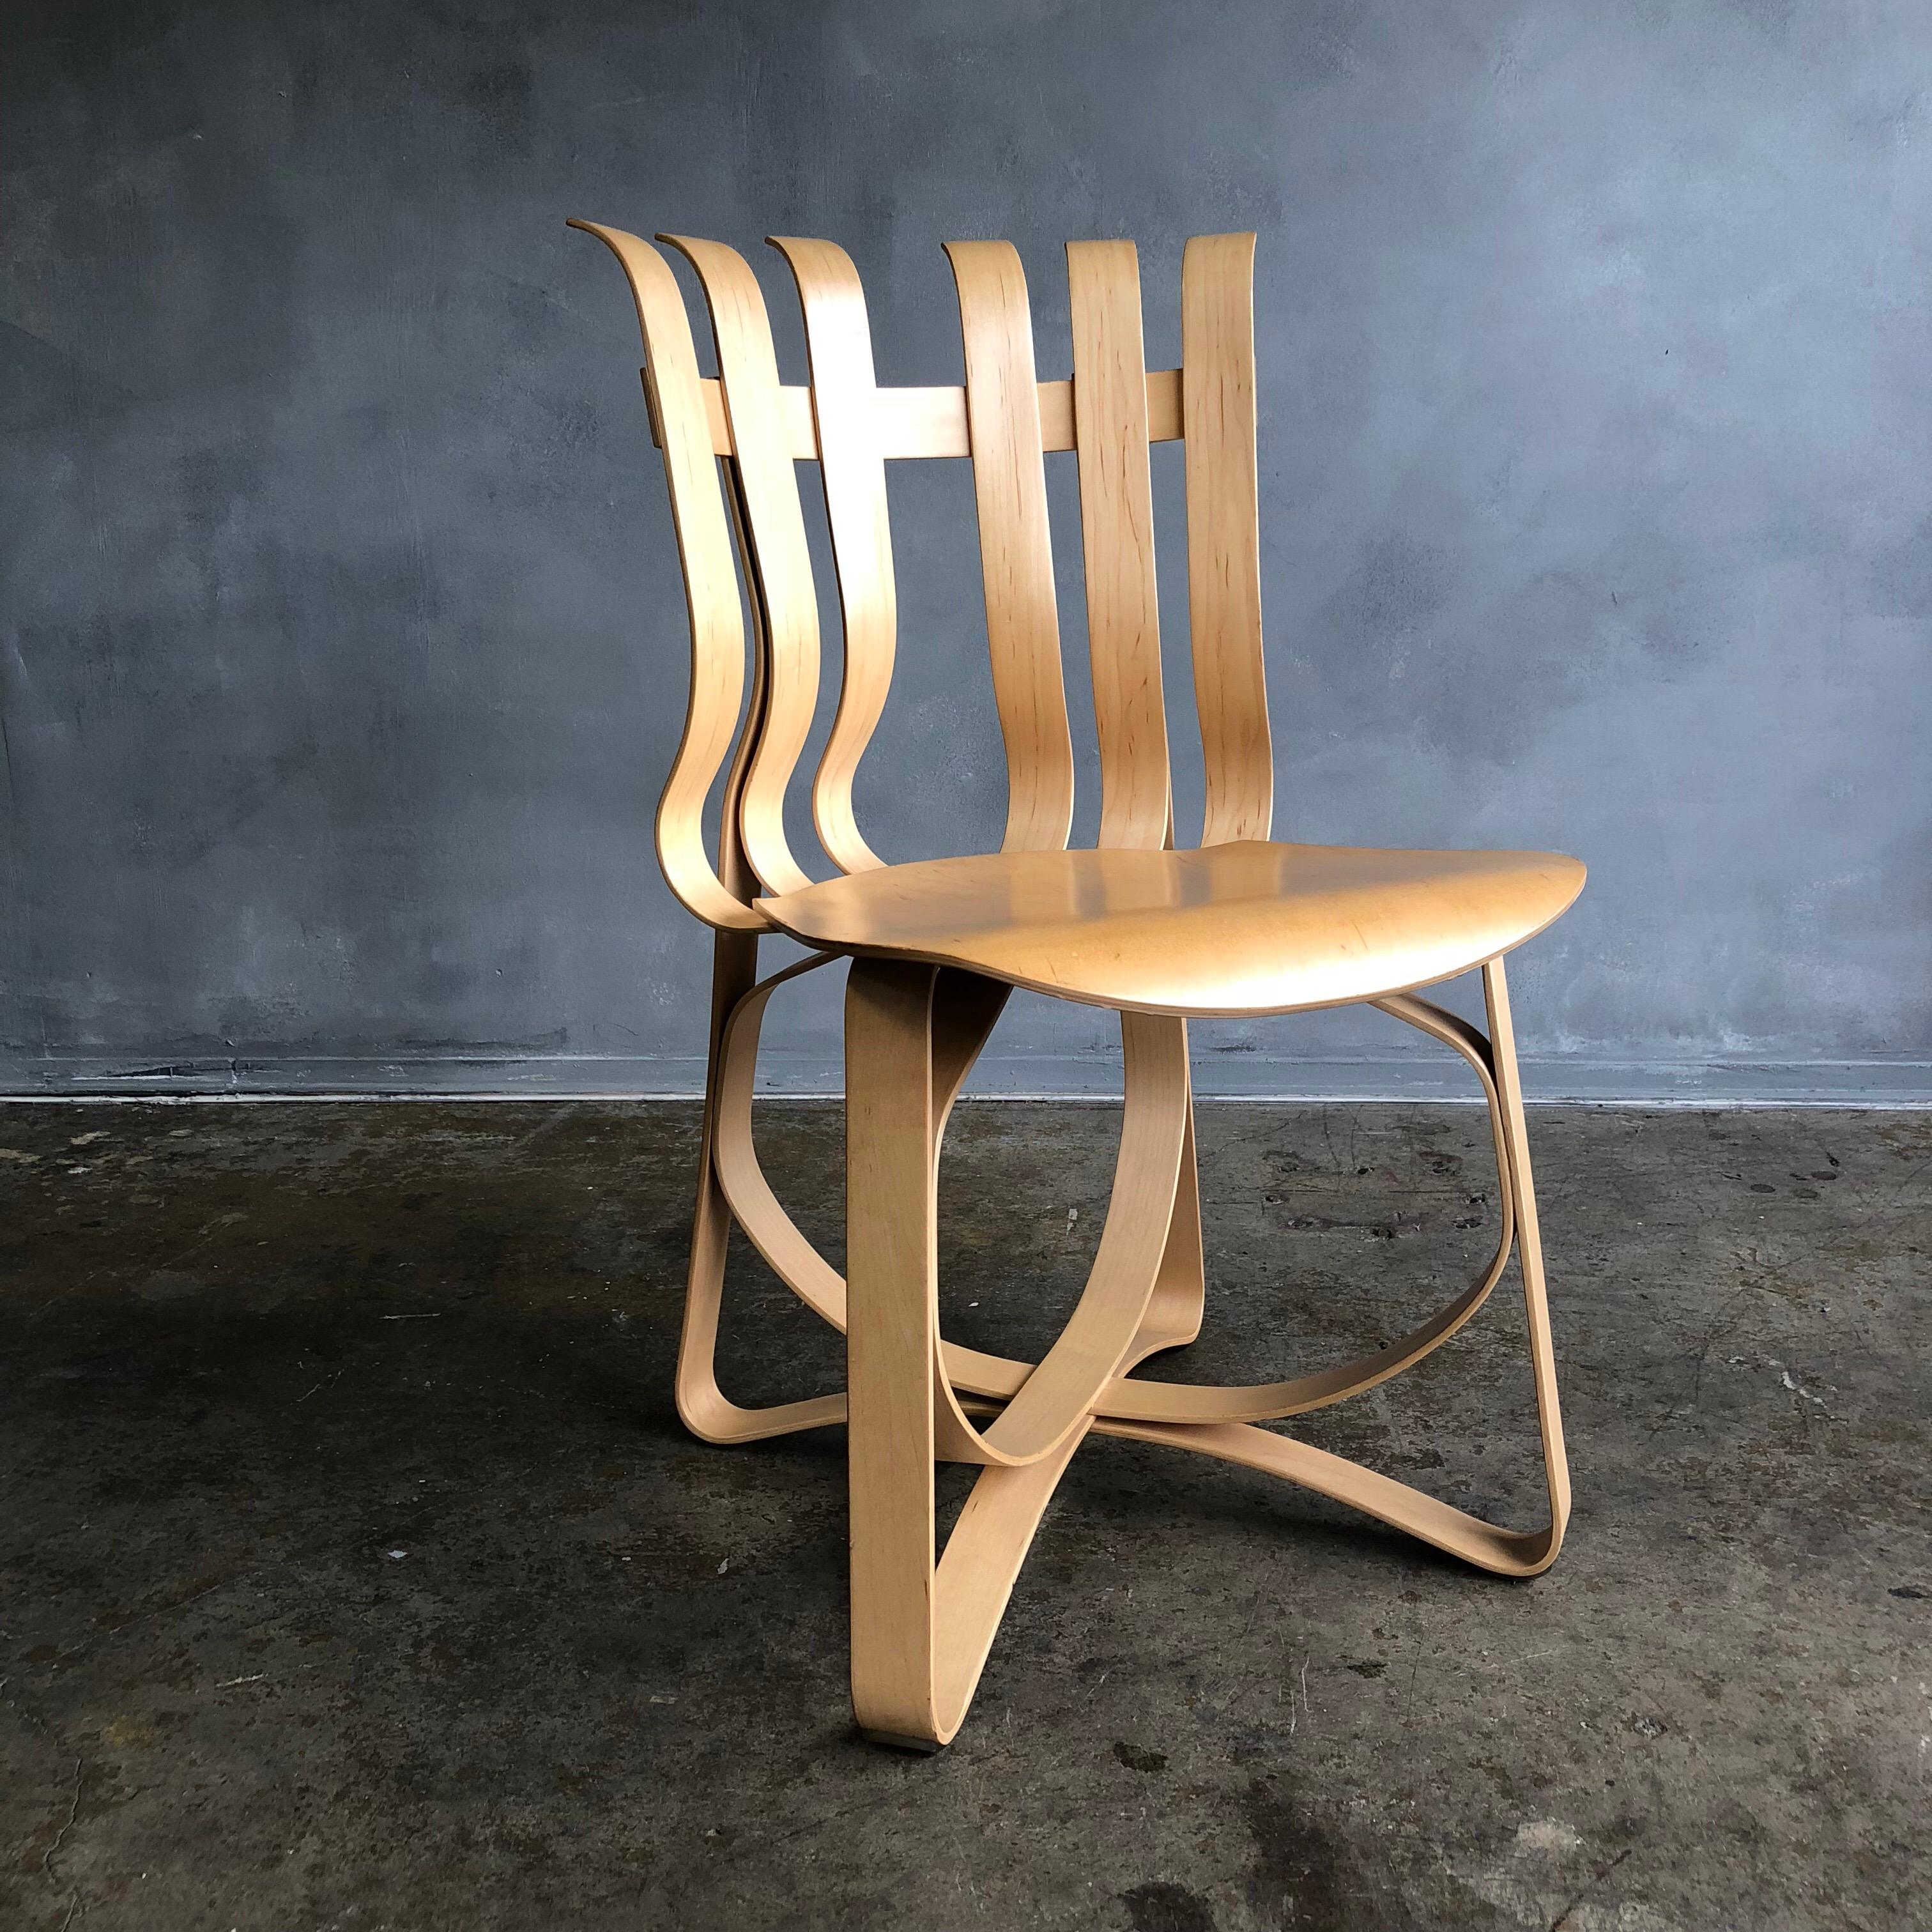 Inspired by the strength of apple crates Frank Gehry designed this uniquely beautiful maple wood chair. While this chair looks fragile it is deceptively strong and sturdy.